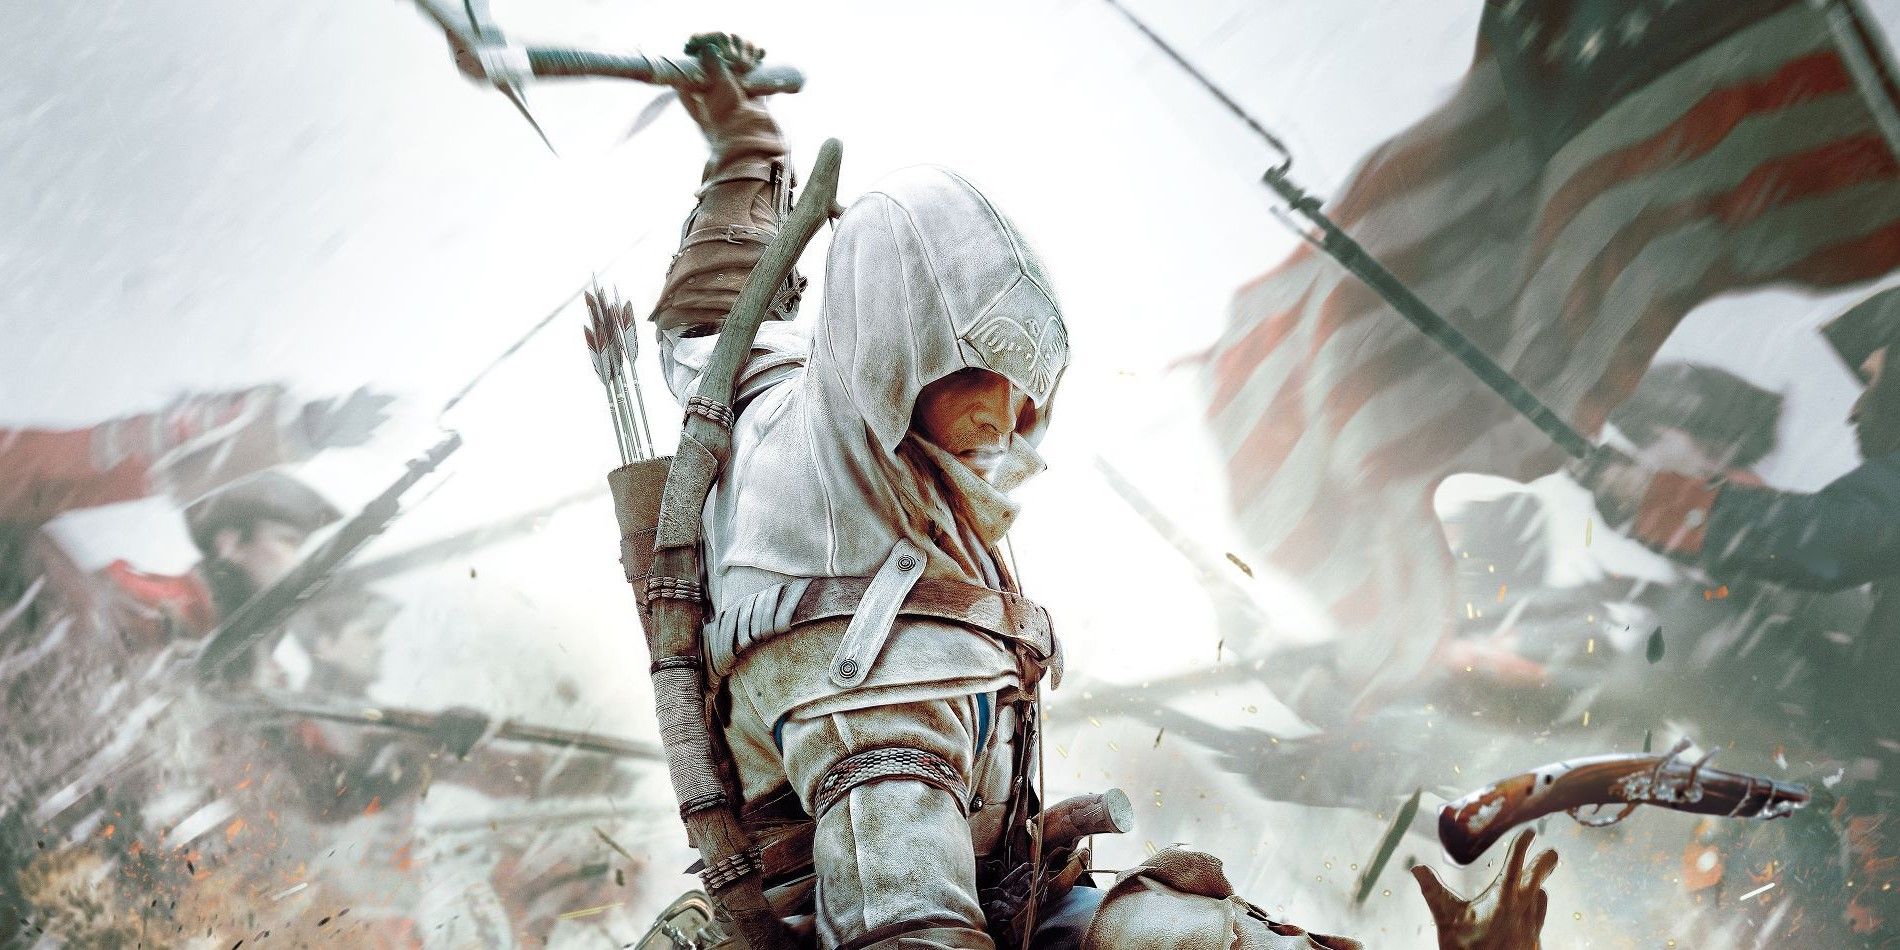 Assassins Creed 3 Conner with hatchet.